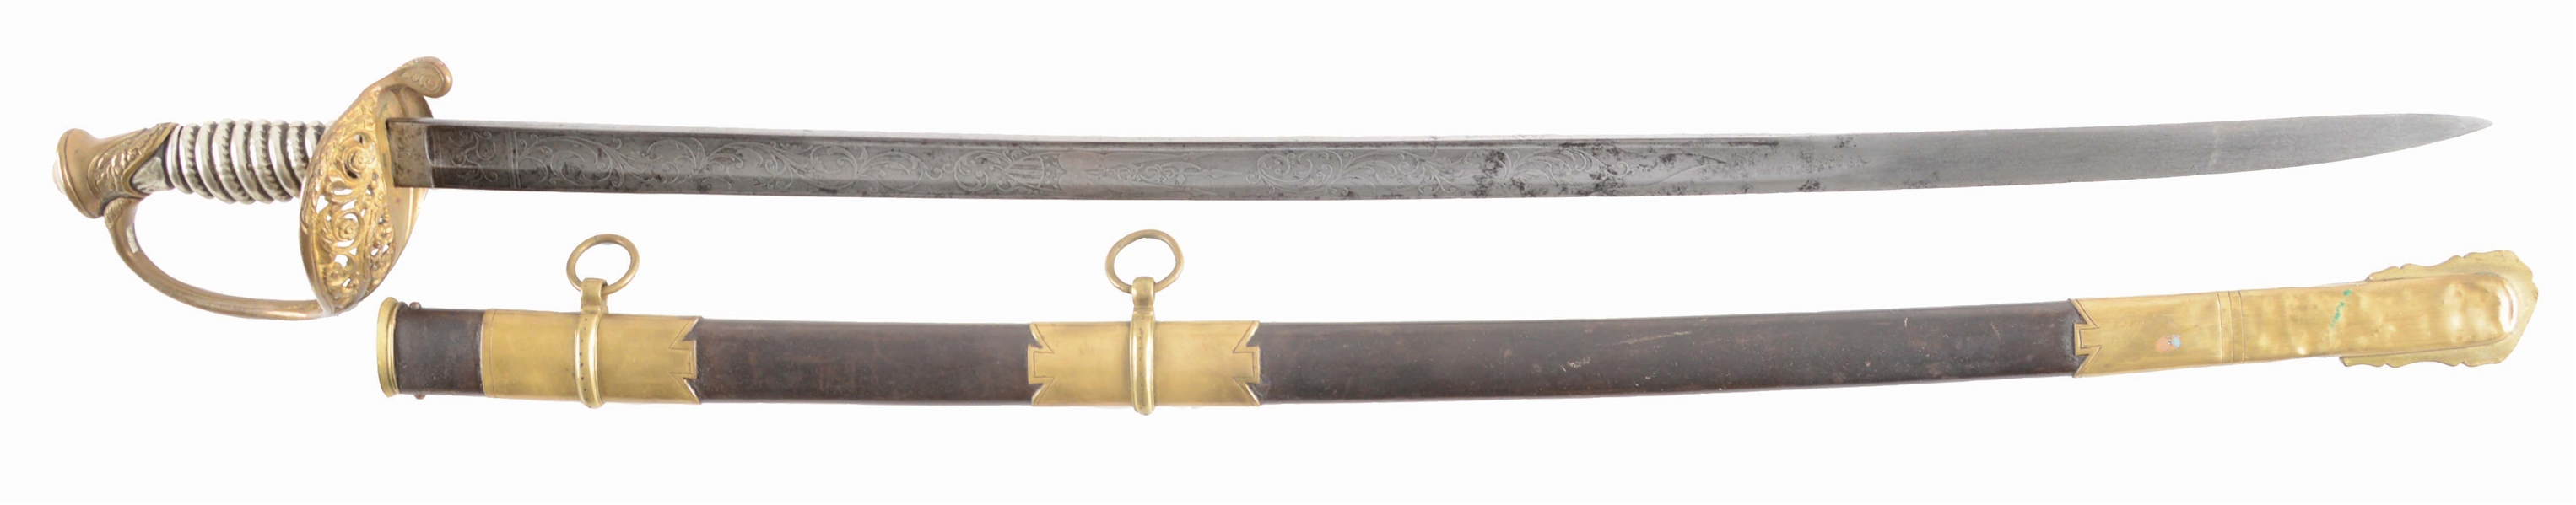 AN ATTRACTIVE 1850 FOOT OFFICERS SABER WITH SILVER GRIP.